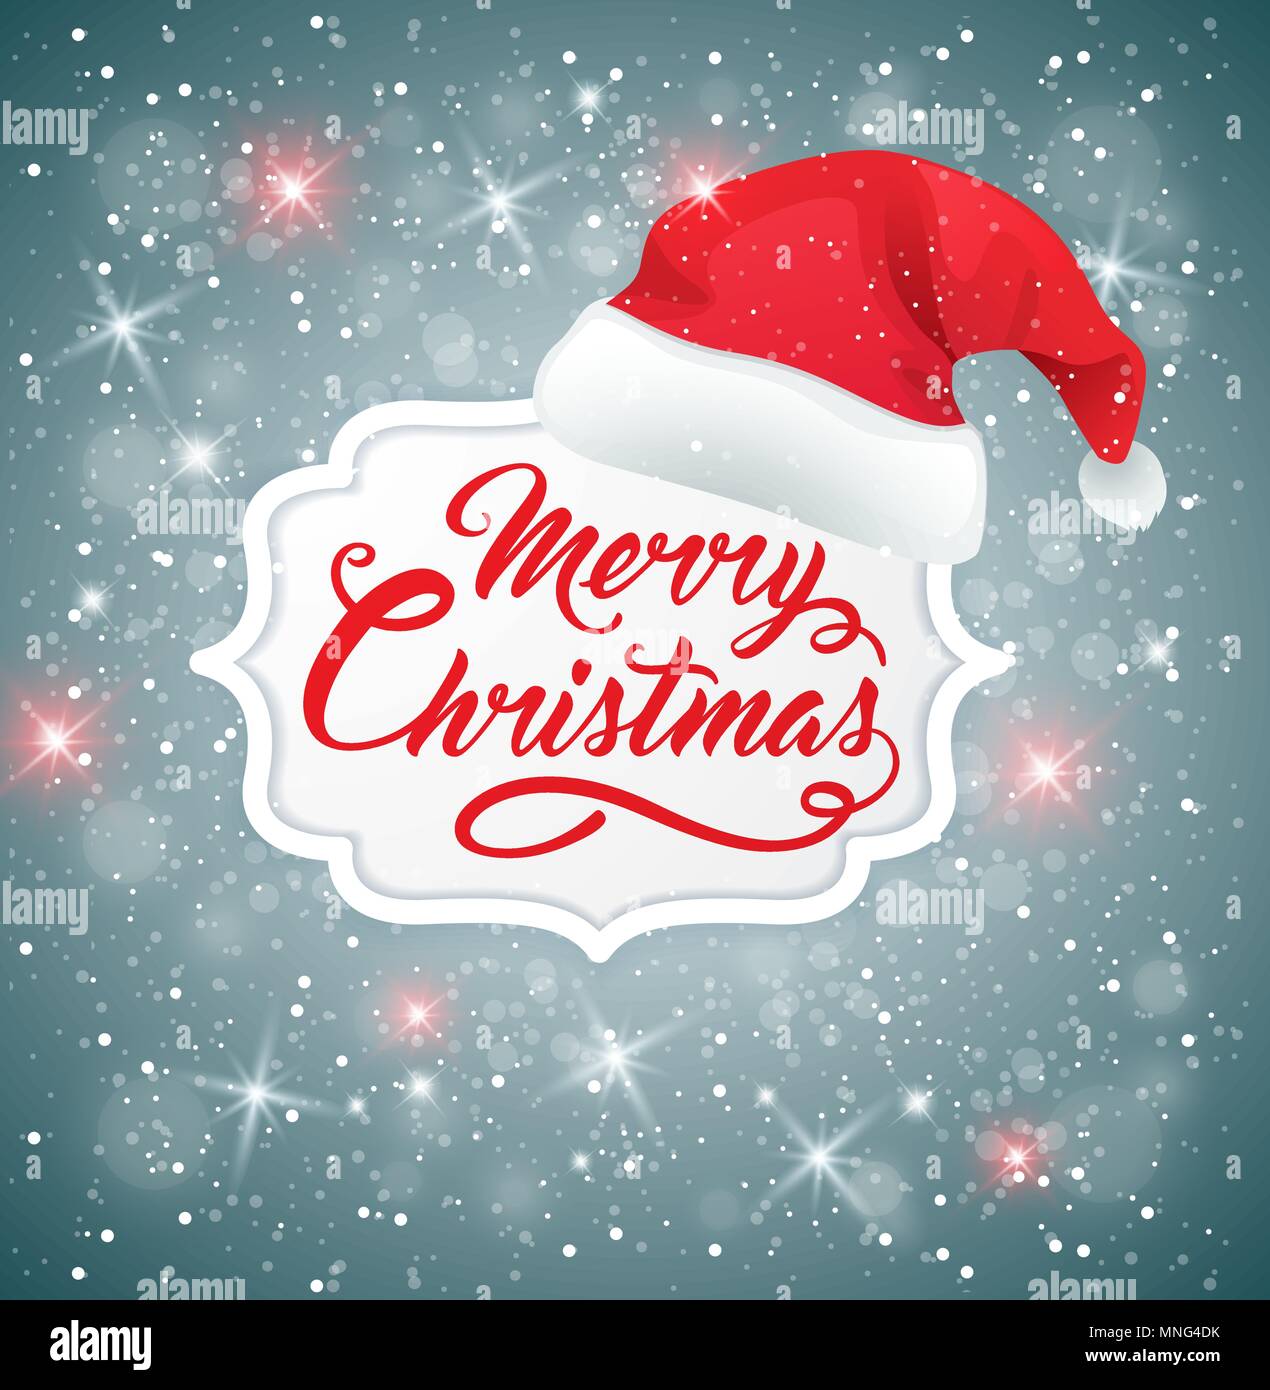 Vector Christmas background with hat of Santa Claus. Merry Christmas lettering Stock Vector